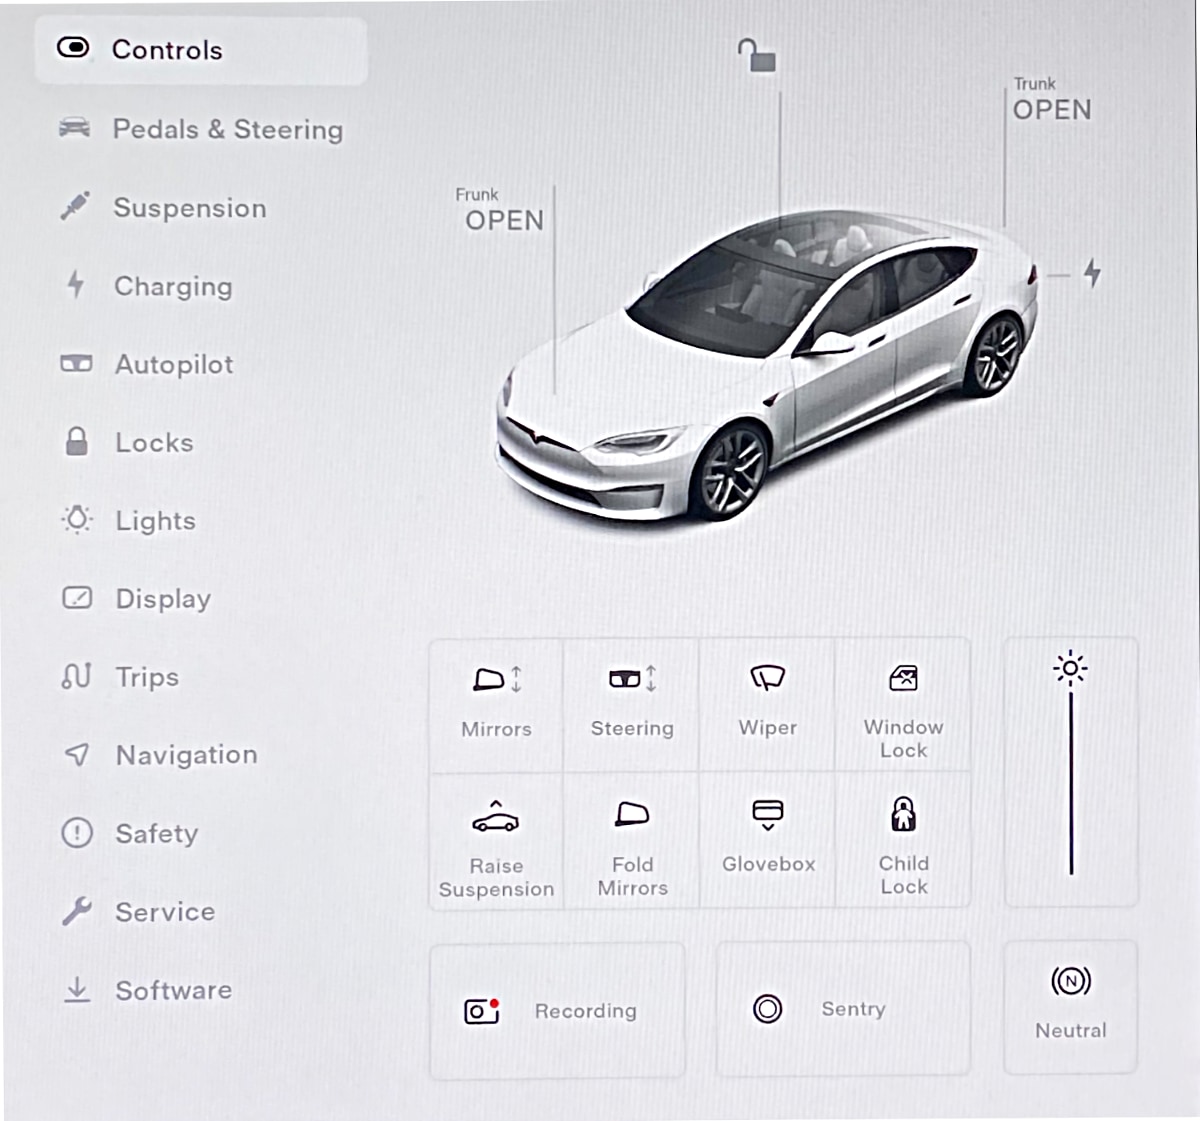 Tesla Redesigned Controls Panel feature in update 2021.32.31